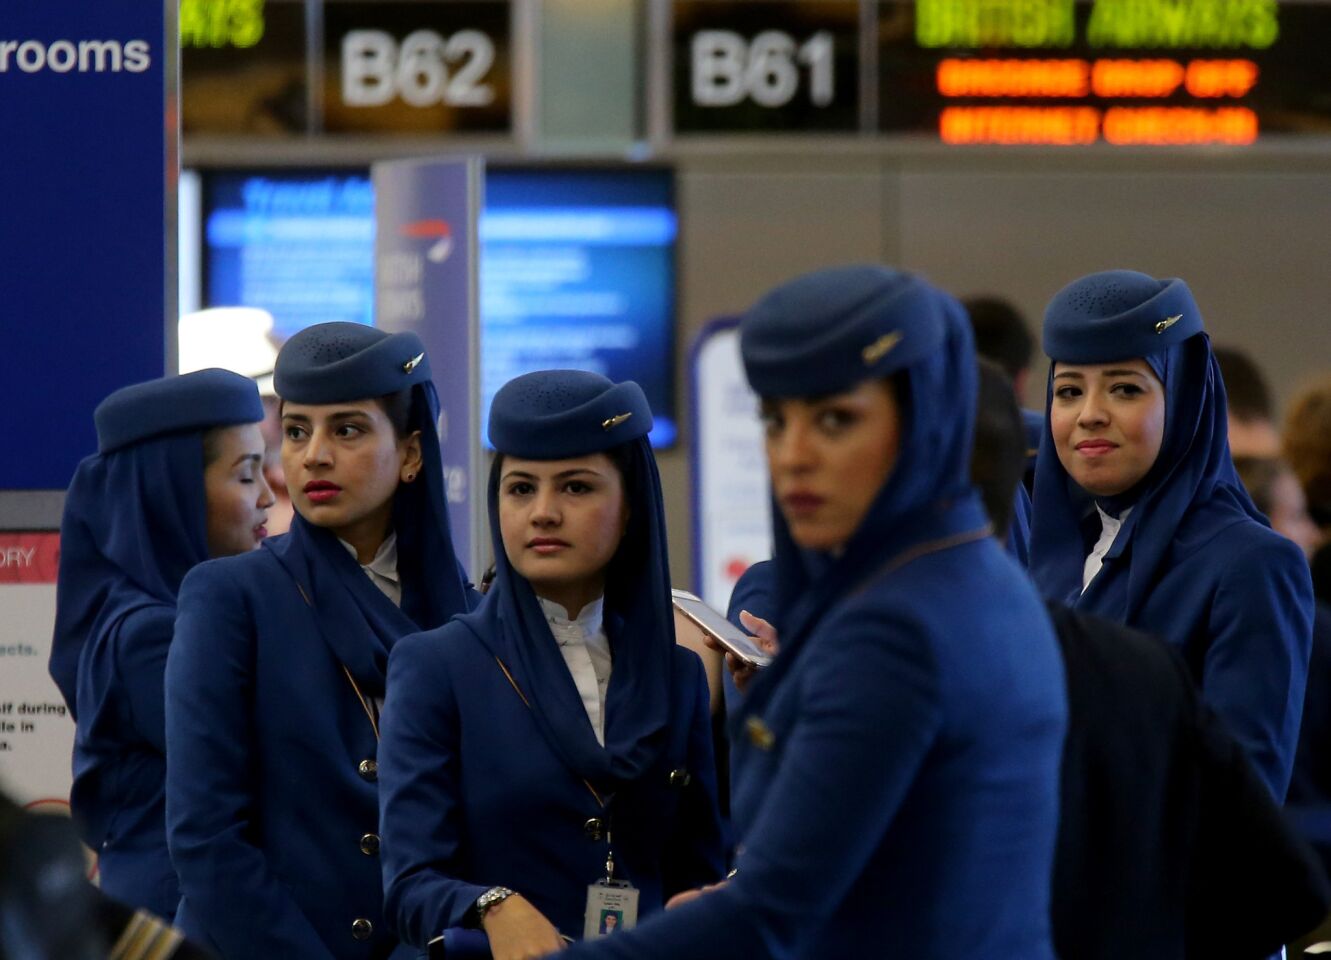 Saudia Airlines flight attendants wait to pass through a securioty checkpoint at the Tom Bradley International Terminal at LAX on Saturday.